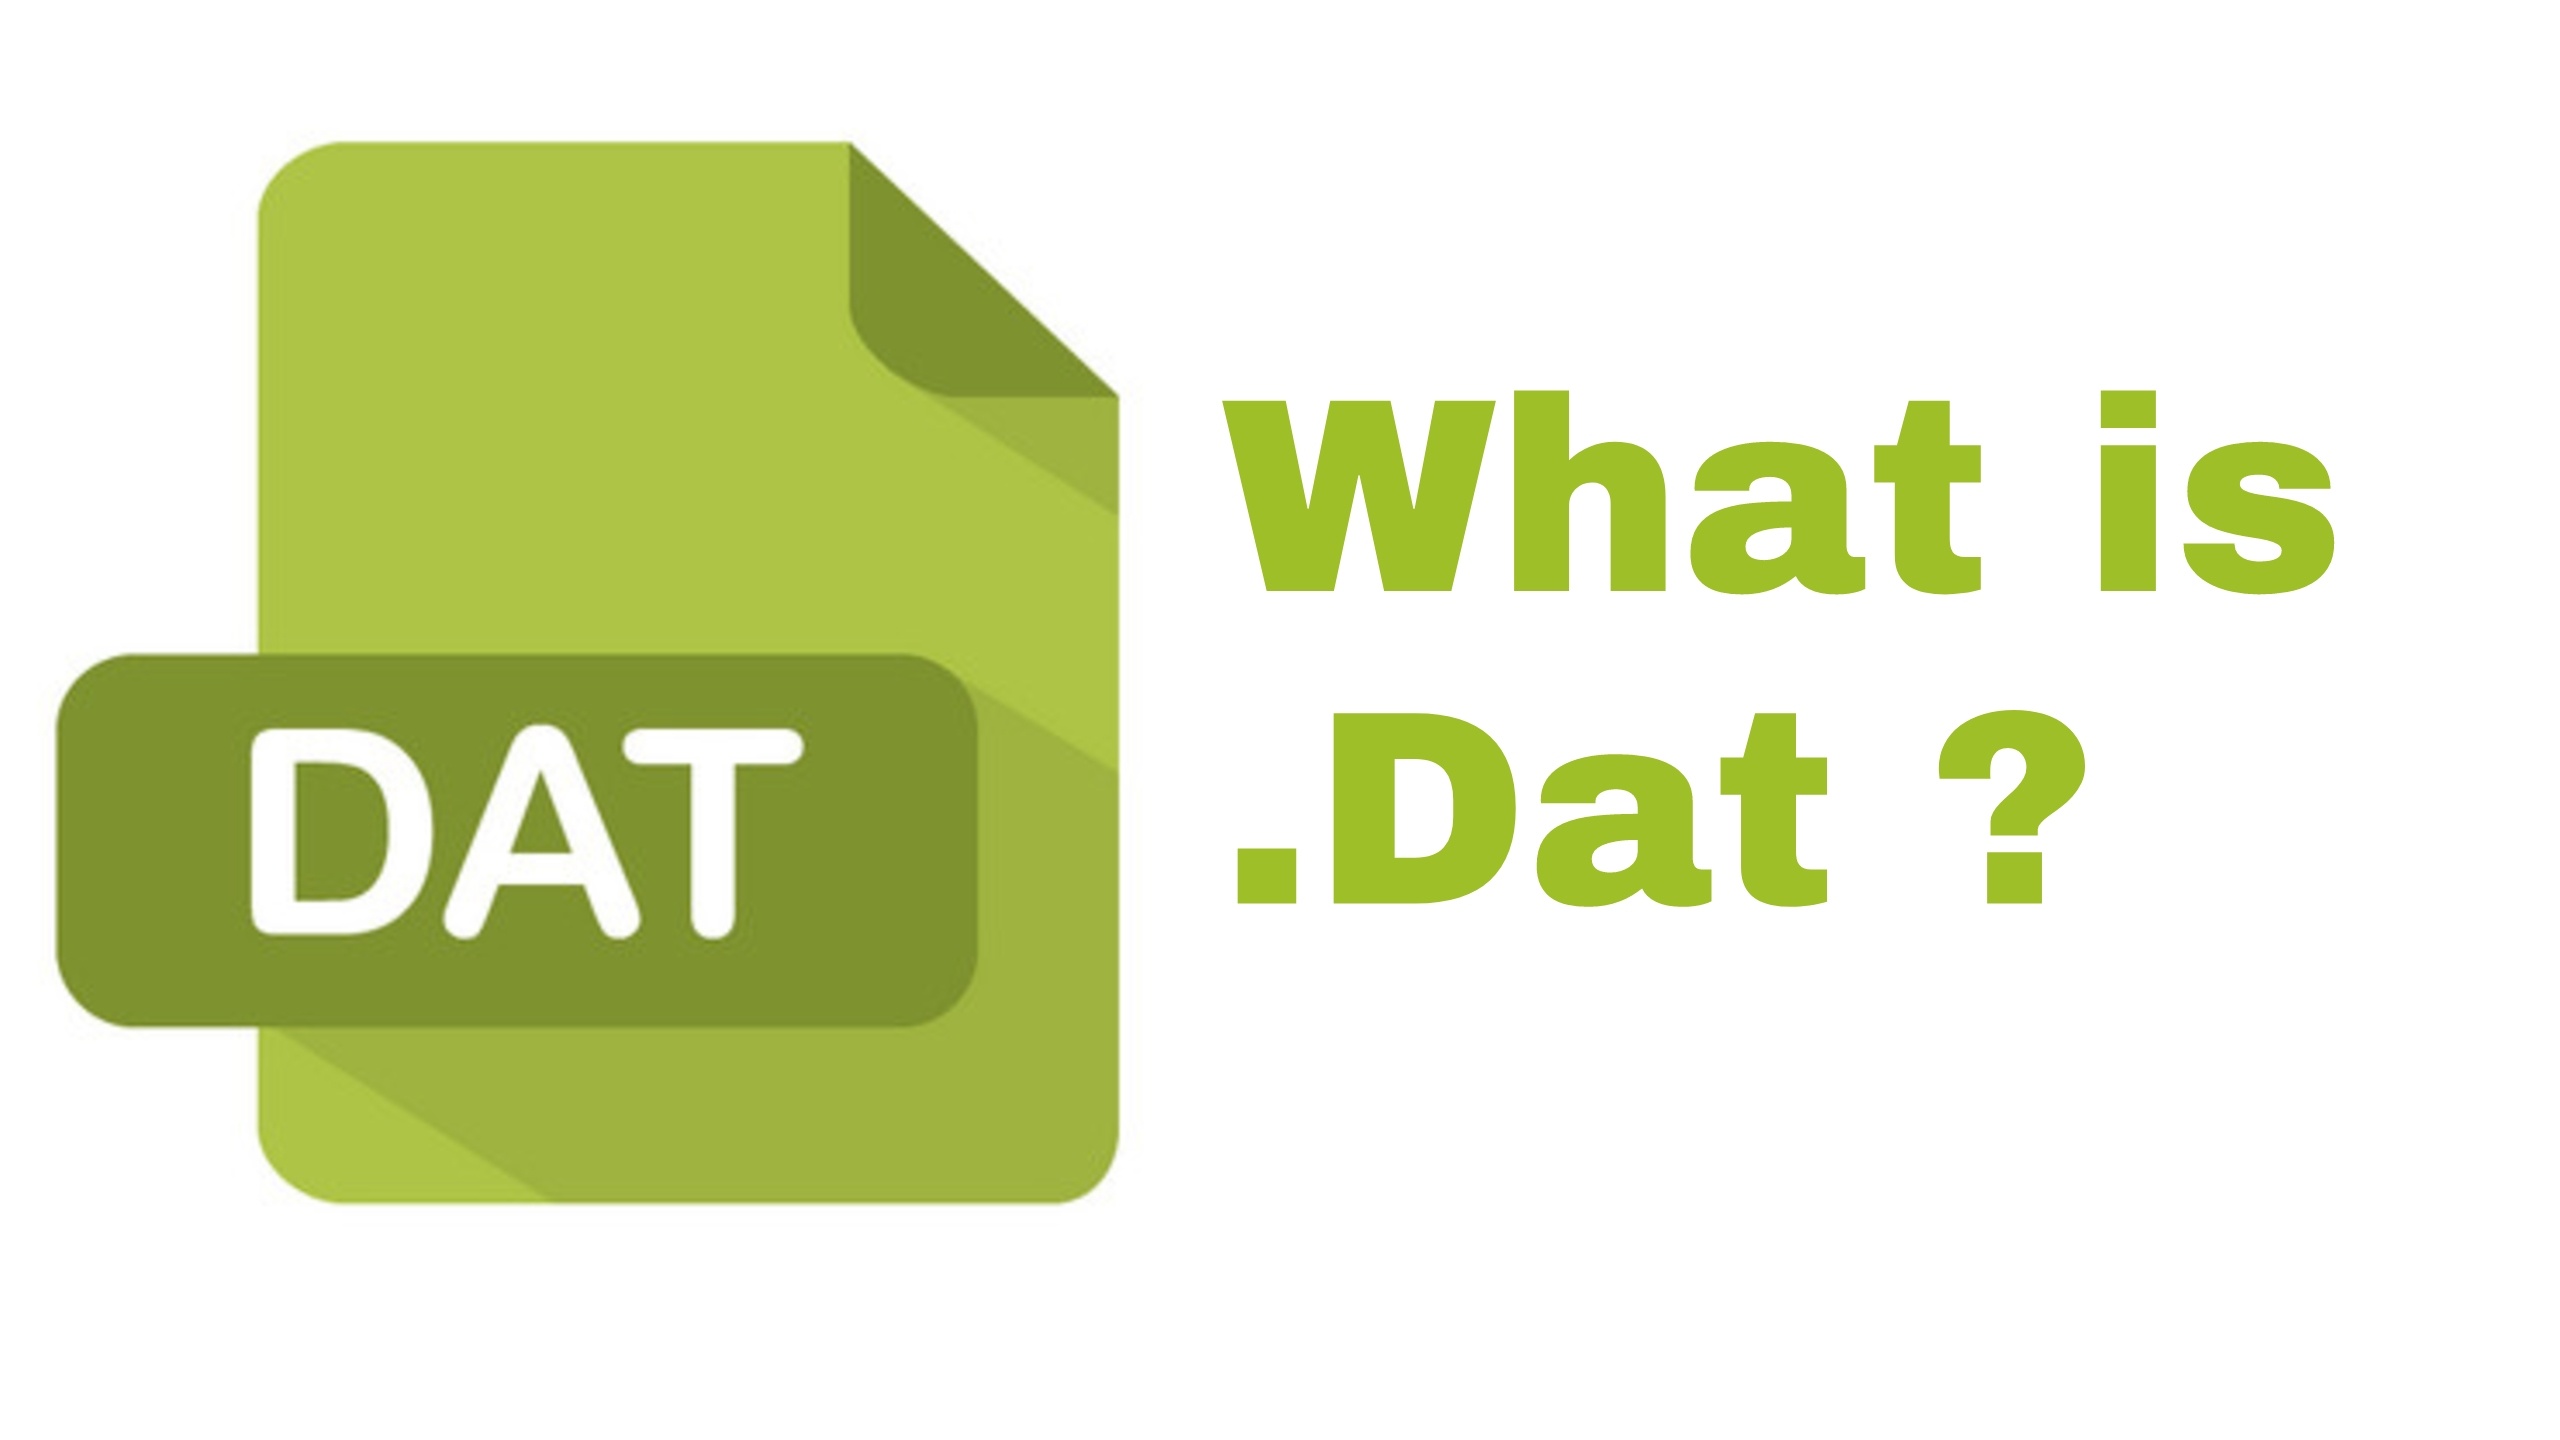 what is a dat file